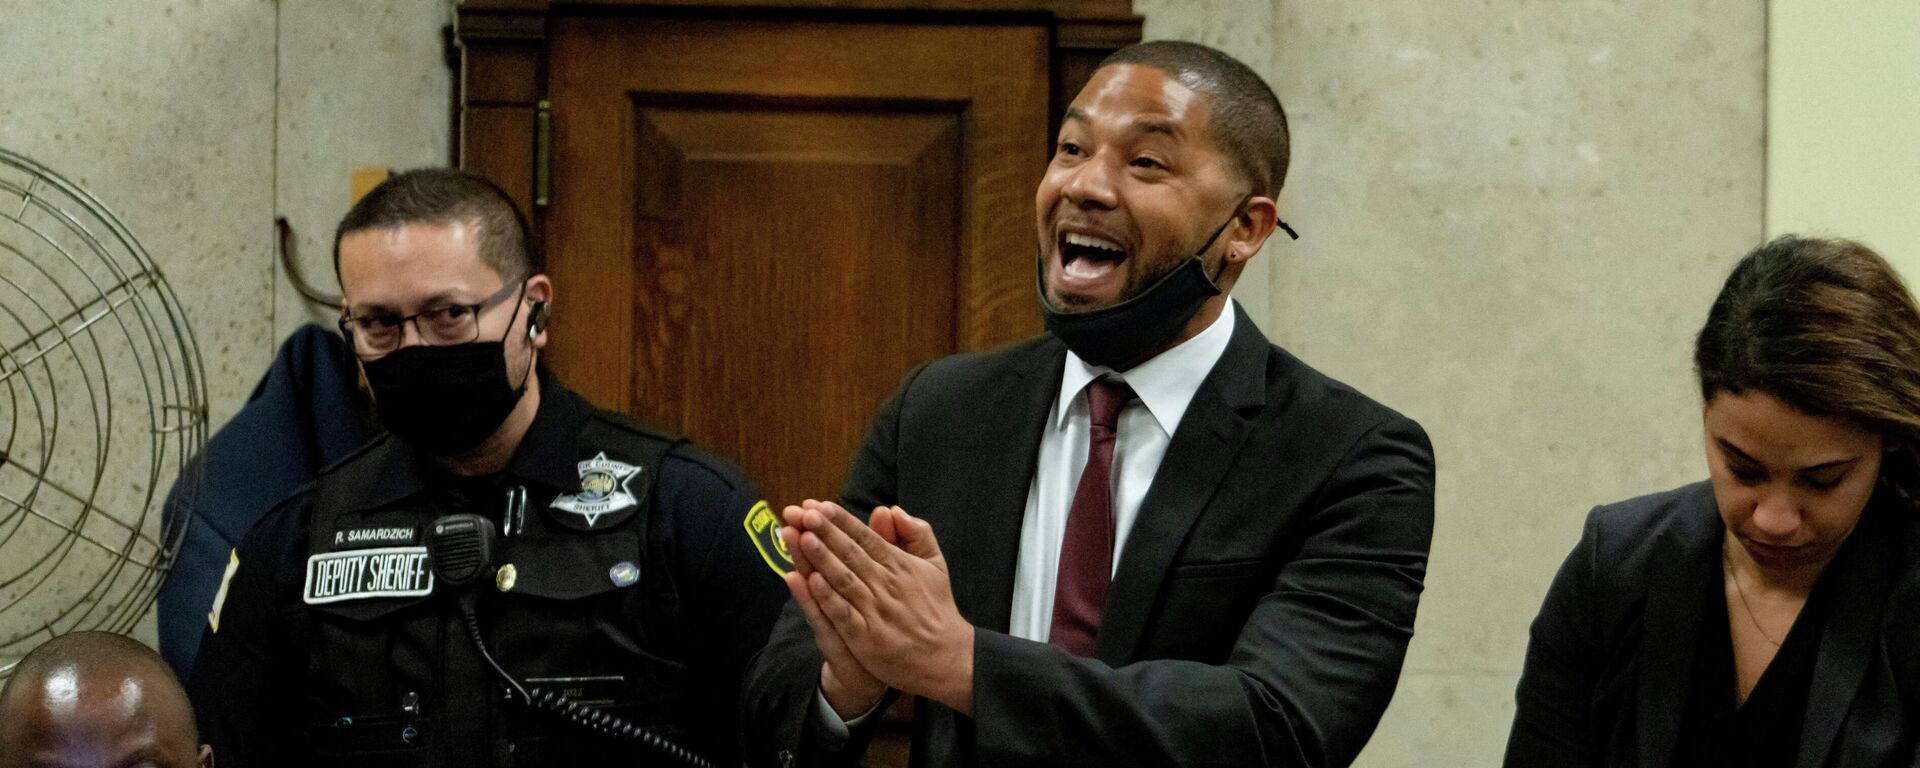 Actor Jussie Smollett speaks to Judge James Linn after his sentence is read at the Leighton Criminal Court Building, in Chicago, Illinois, U.S., March 10, 2022 - Sputnik International, 1920, 17.03.2022